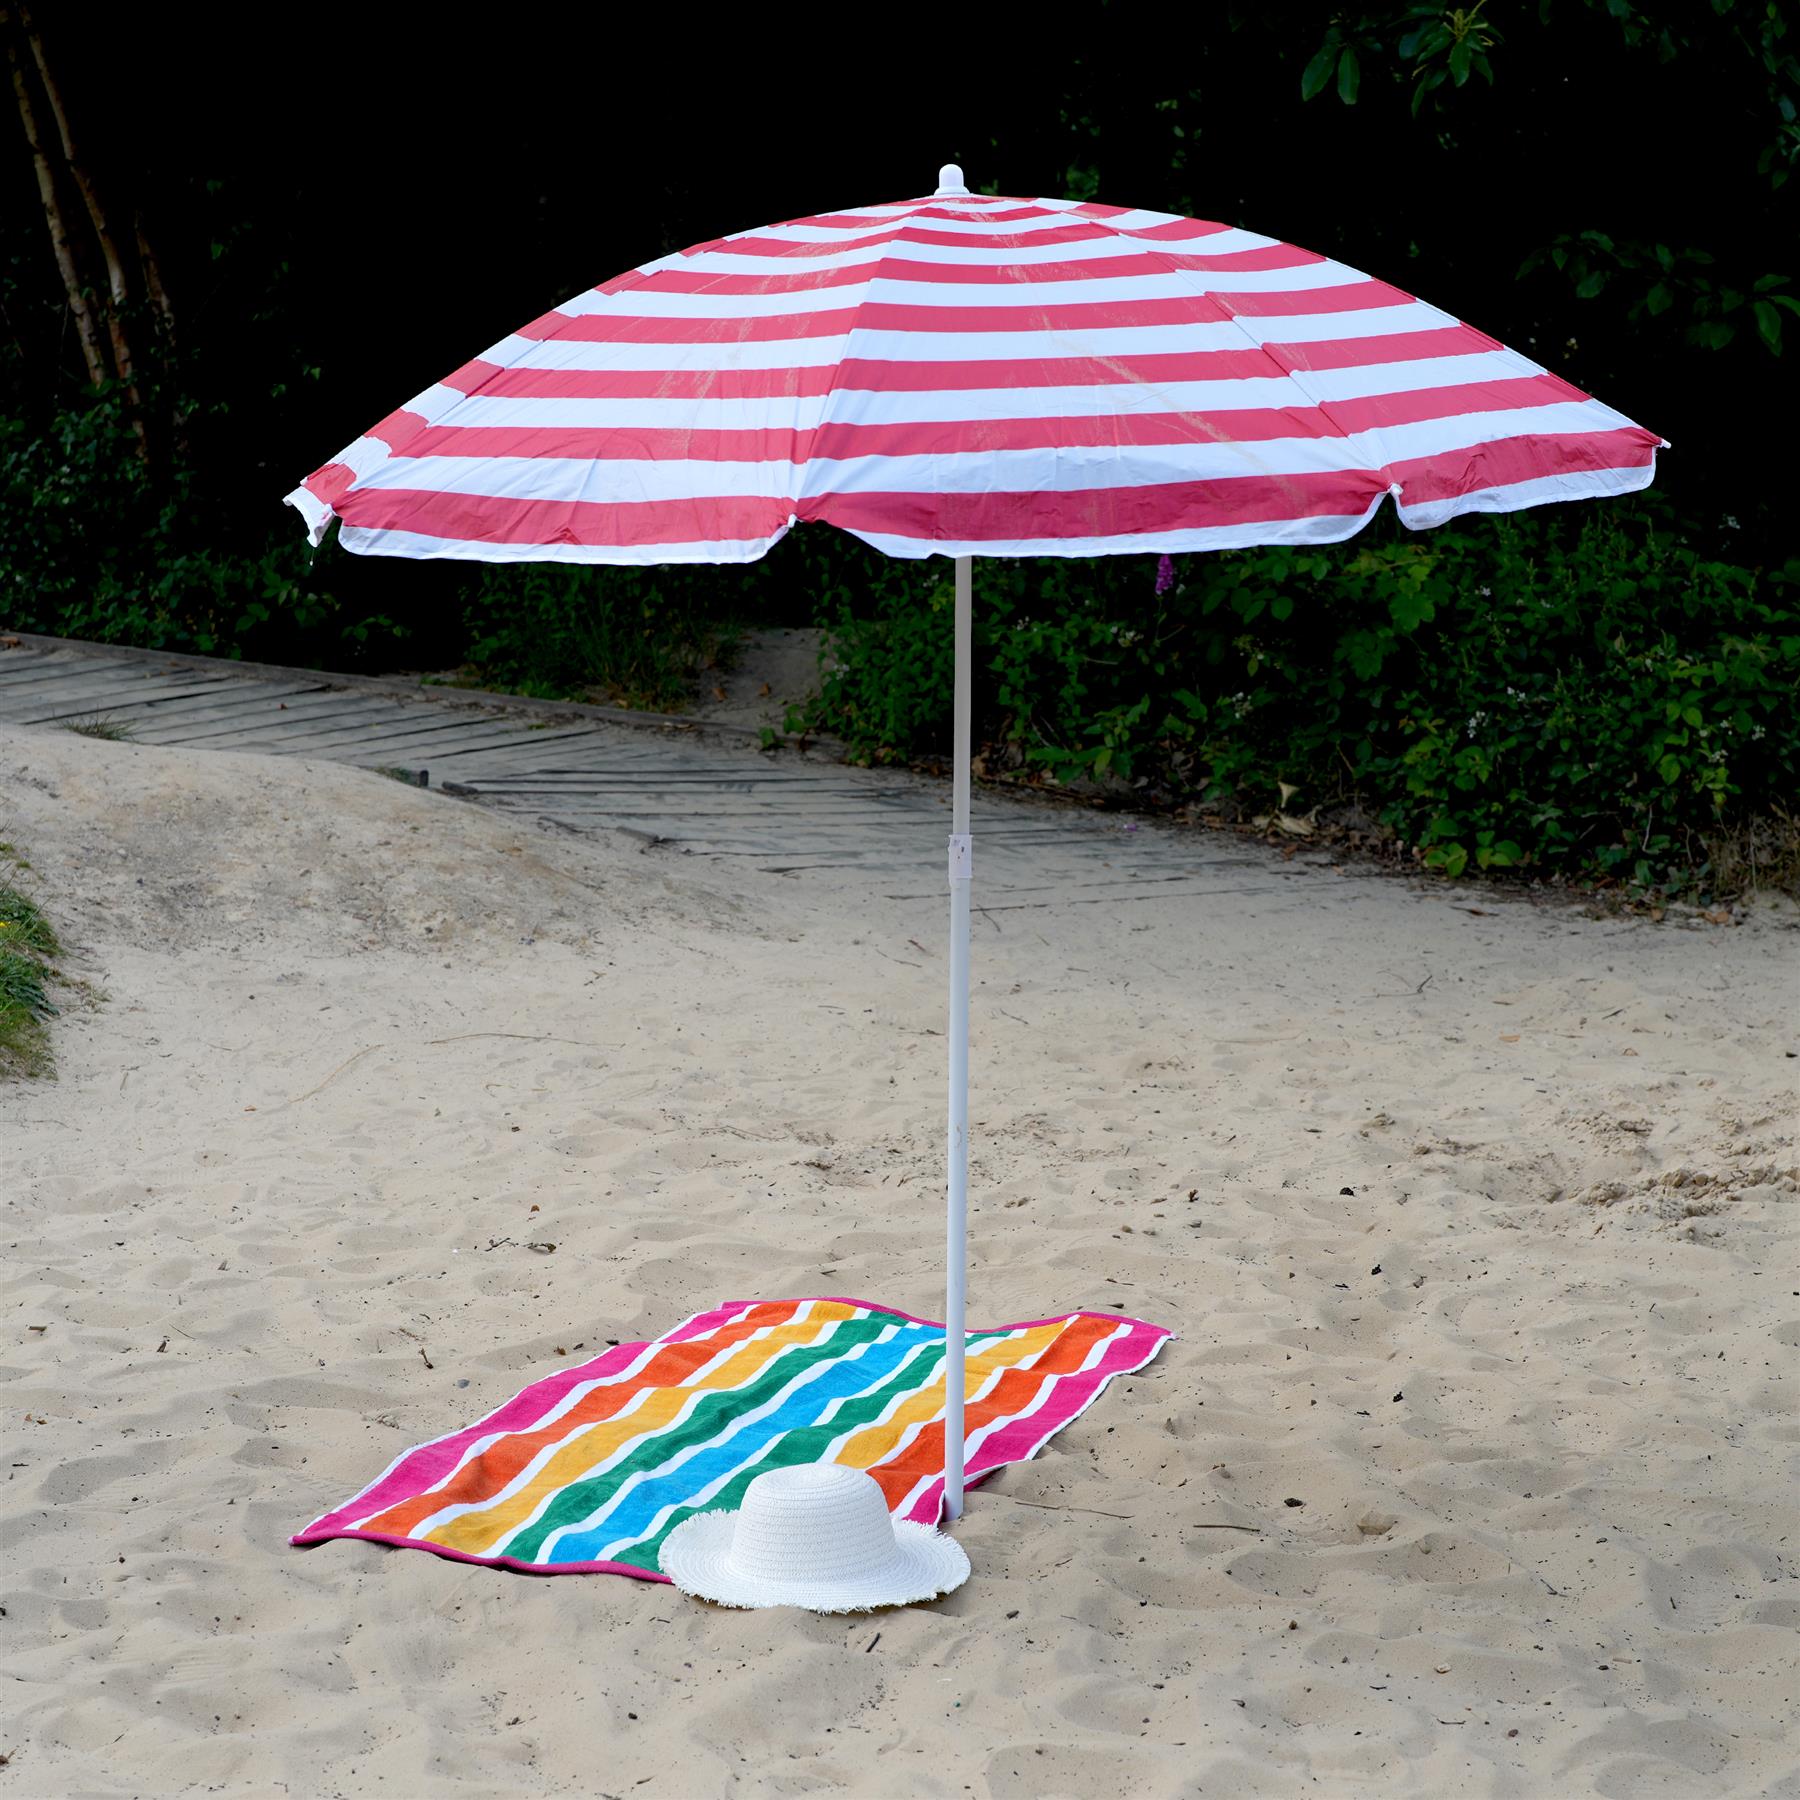 Red Garden Parasol 1.7m by The Magic Toy Shop - The Magic Toy Shop